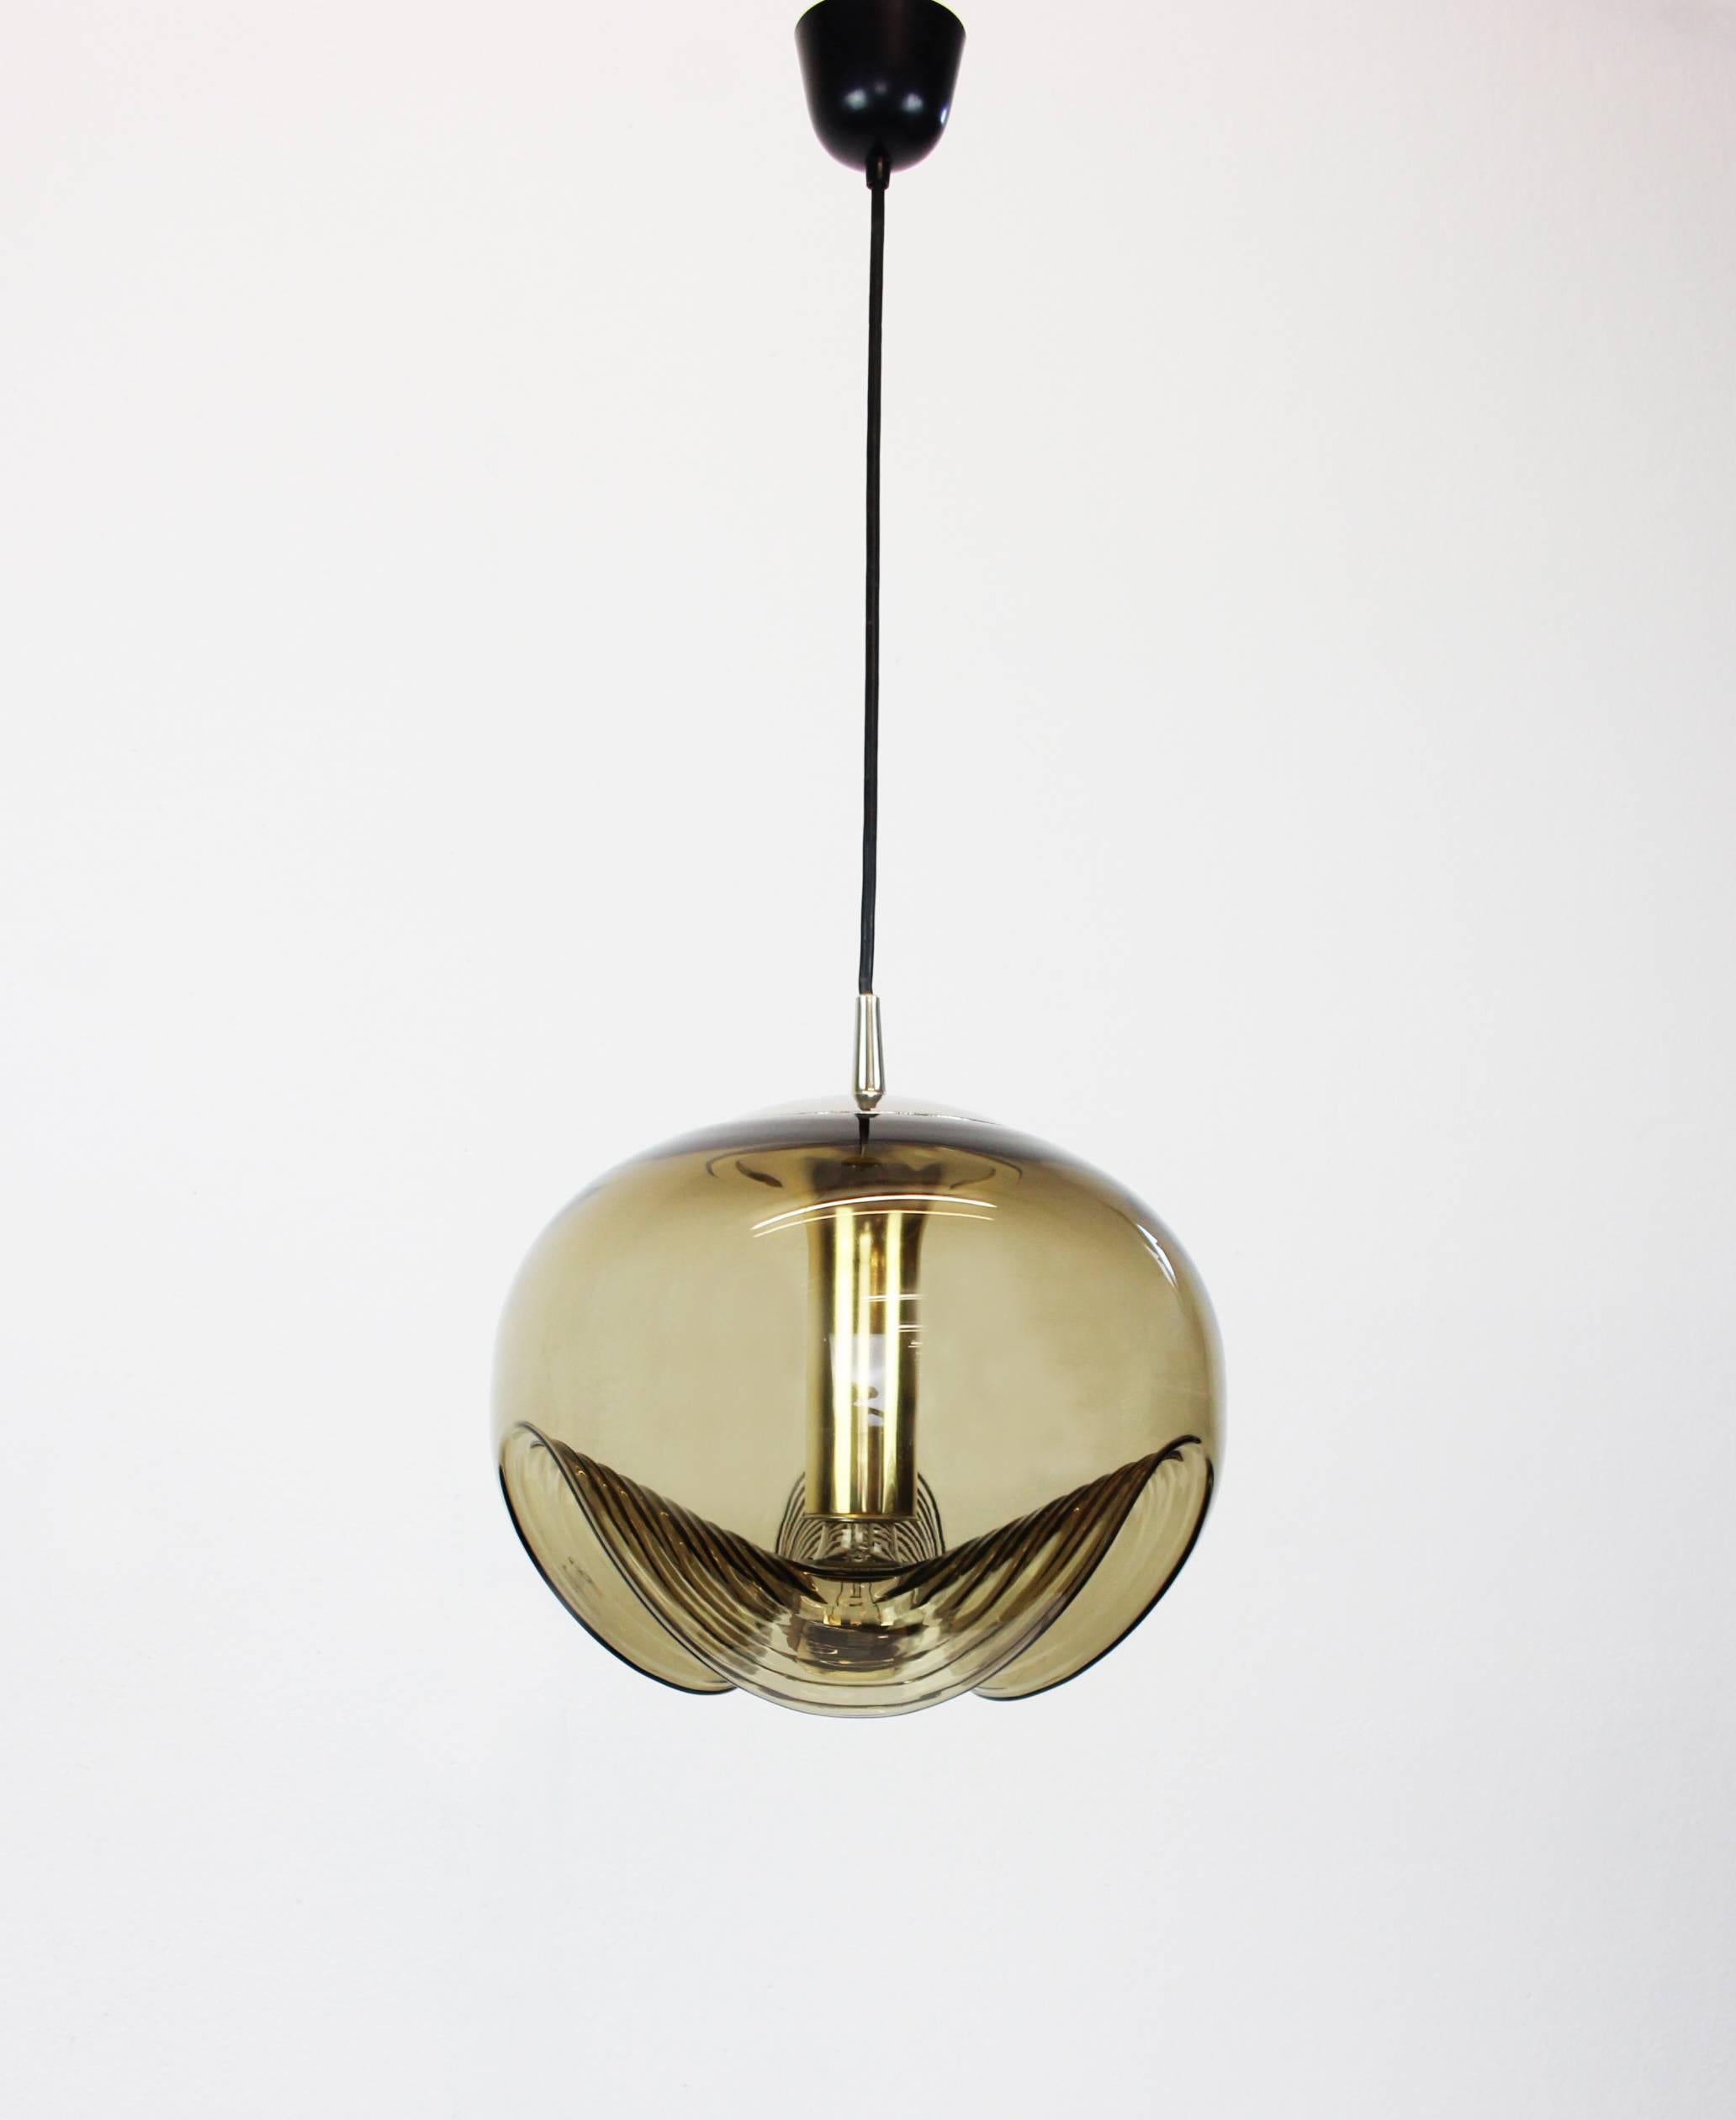 Blown Glass One of Six Large Smoked Glass Pendant Light by Peill & Putzler, Germany, 1970s For Sale